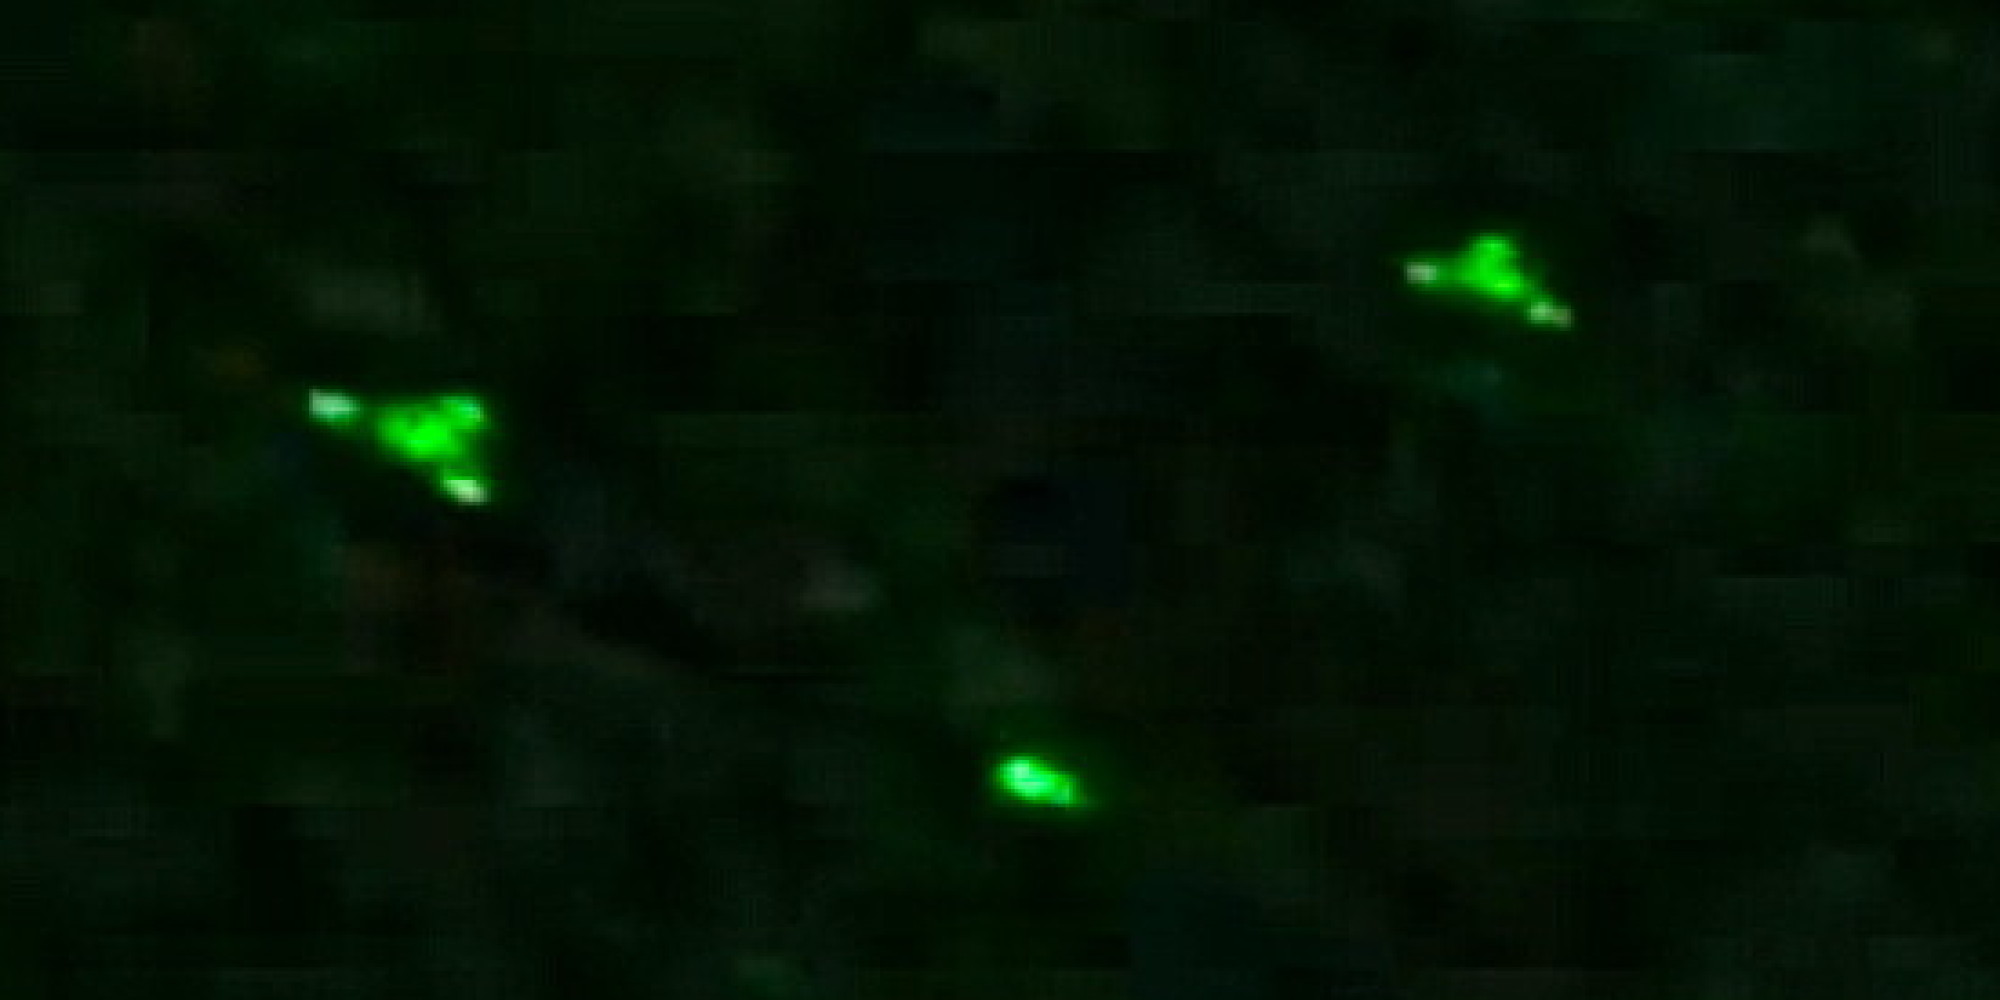 UFOs Over Wittenberge, Germany, Videotaped With Night Vision | HuffPost